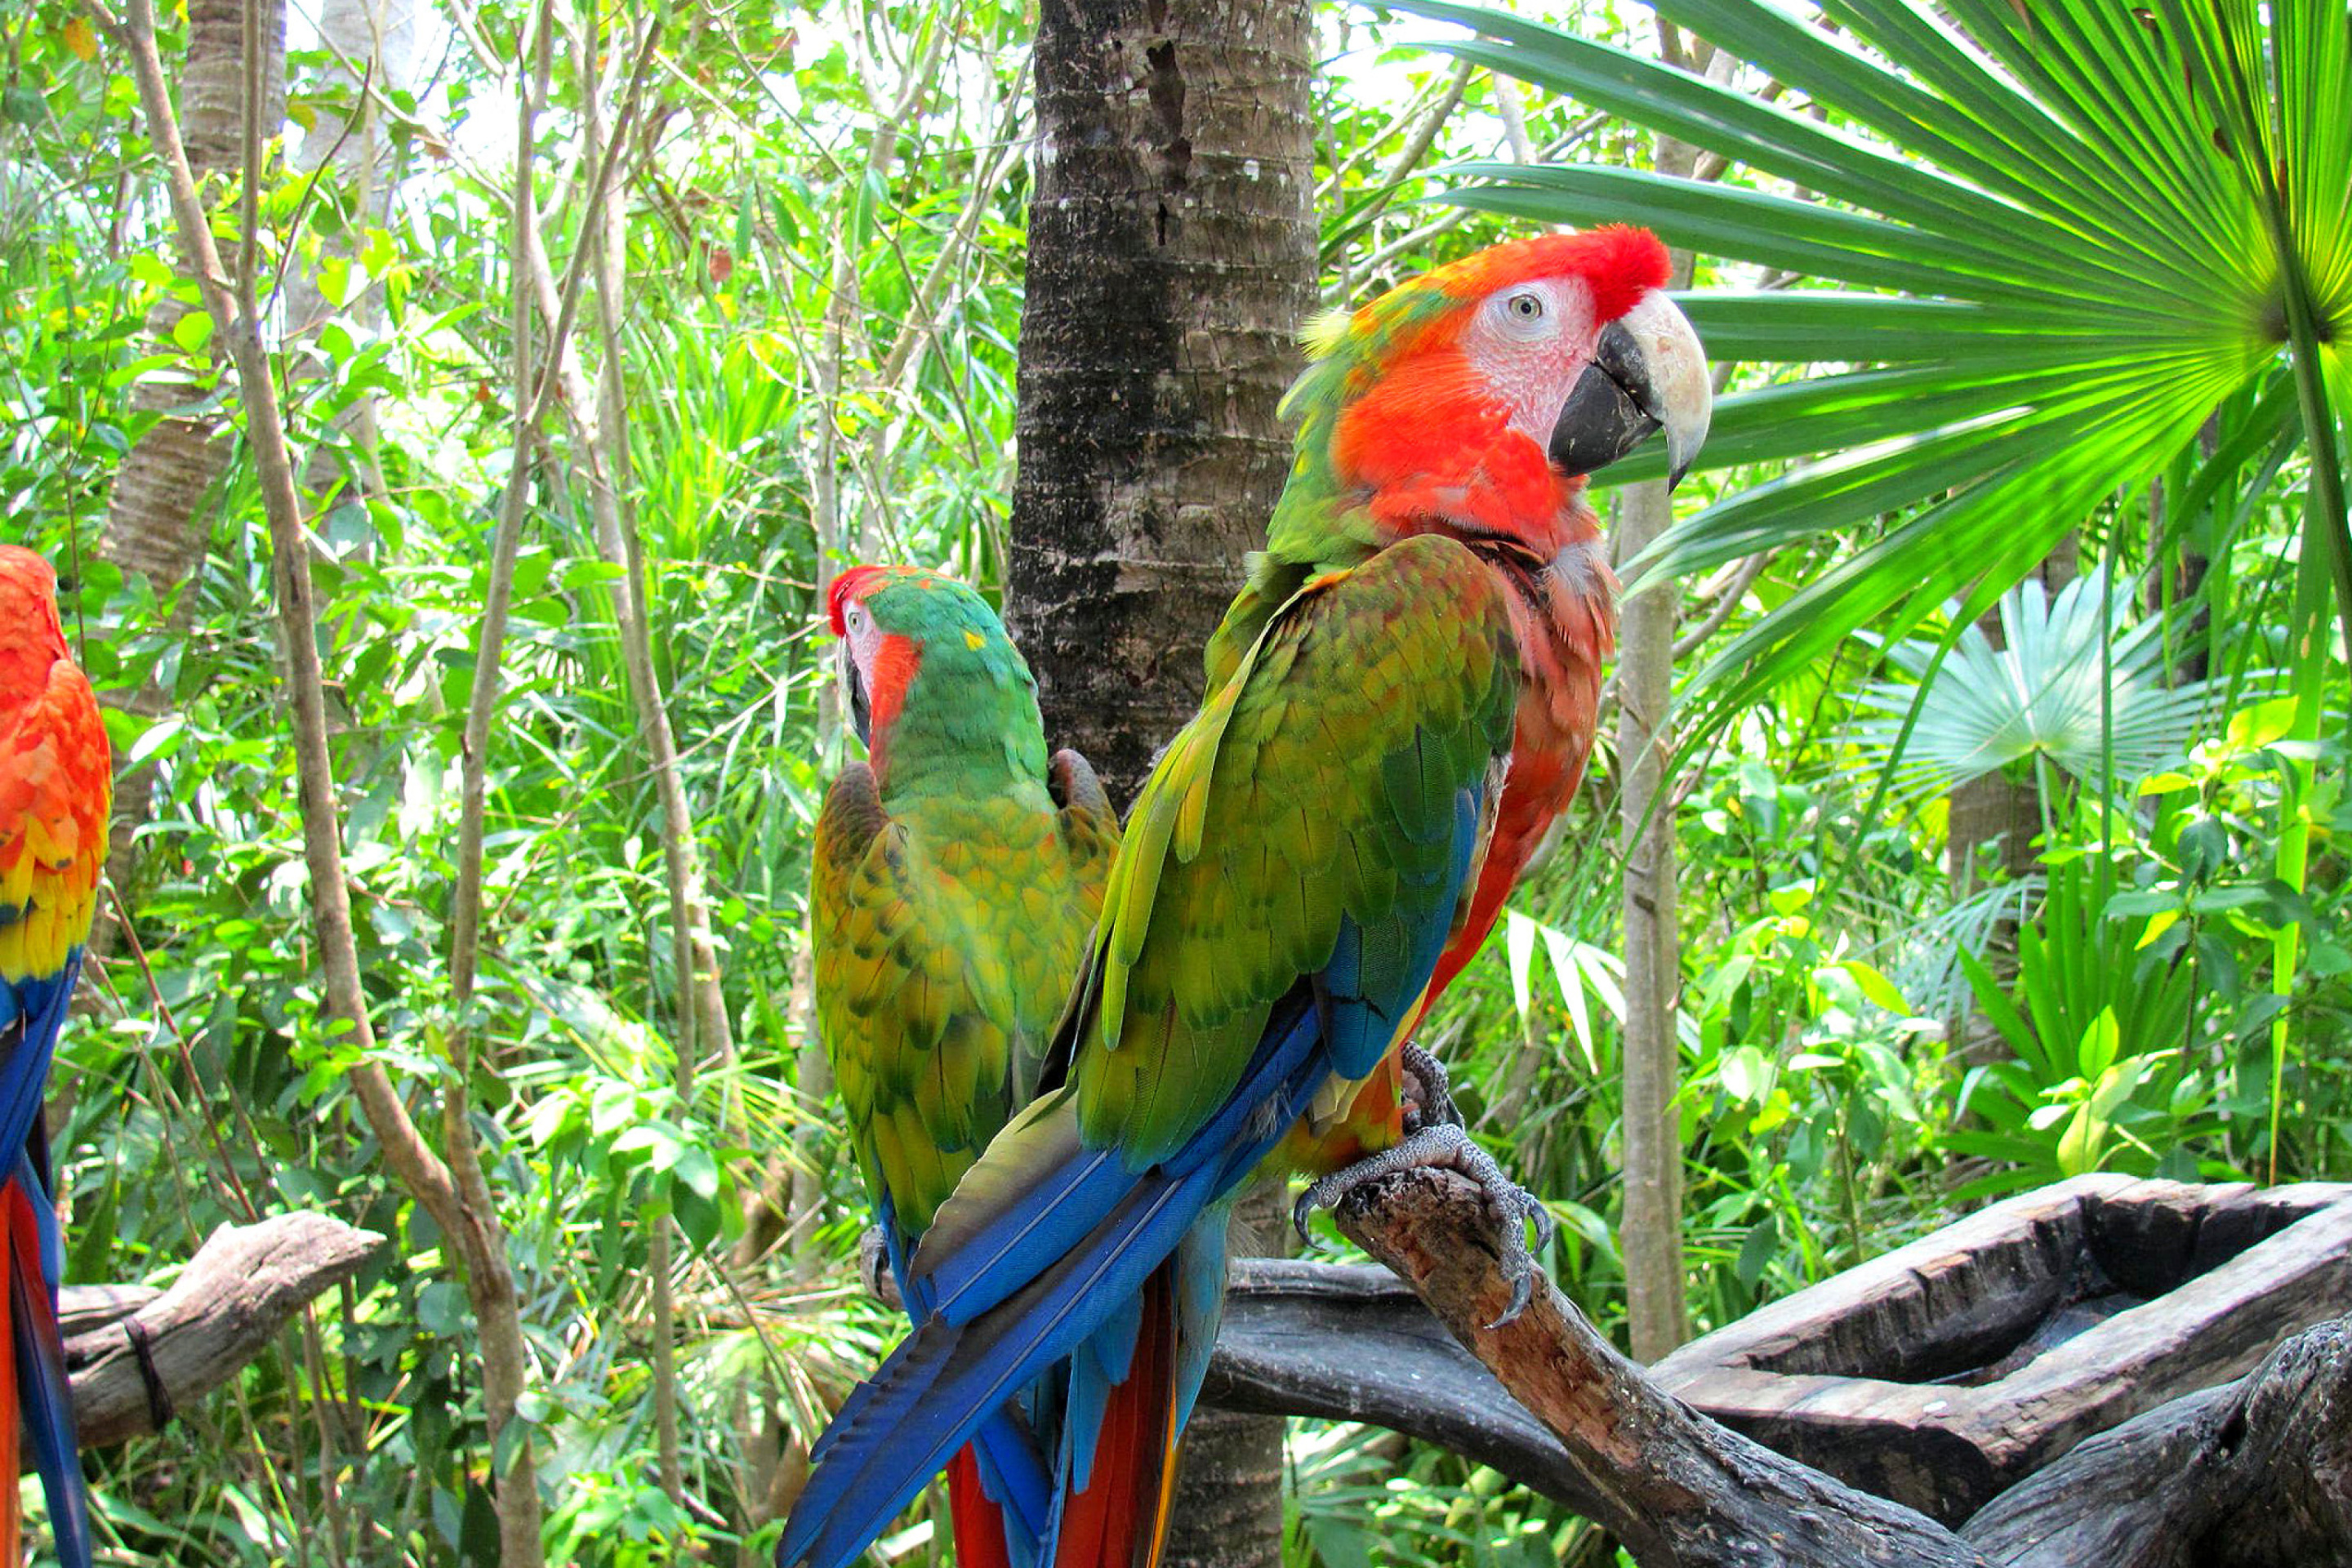 Macaw parrot Amazon forest screenshot #1 2880x1920